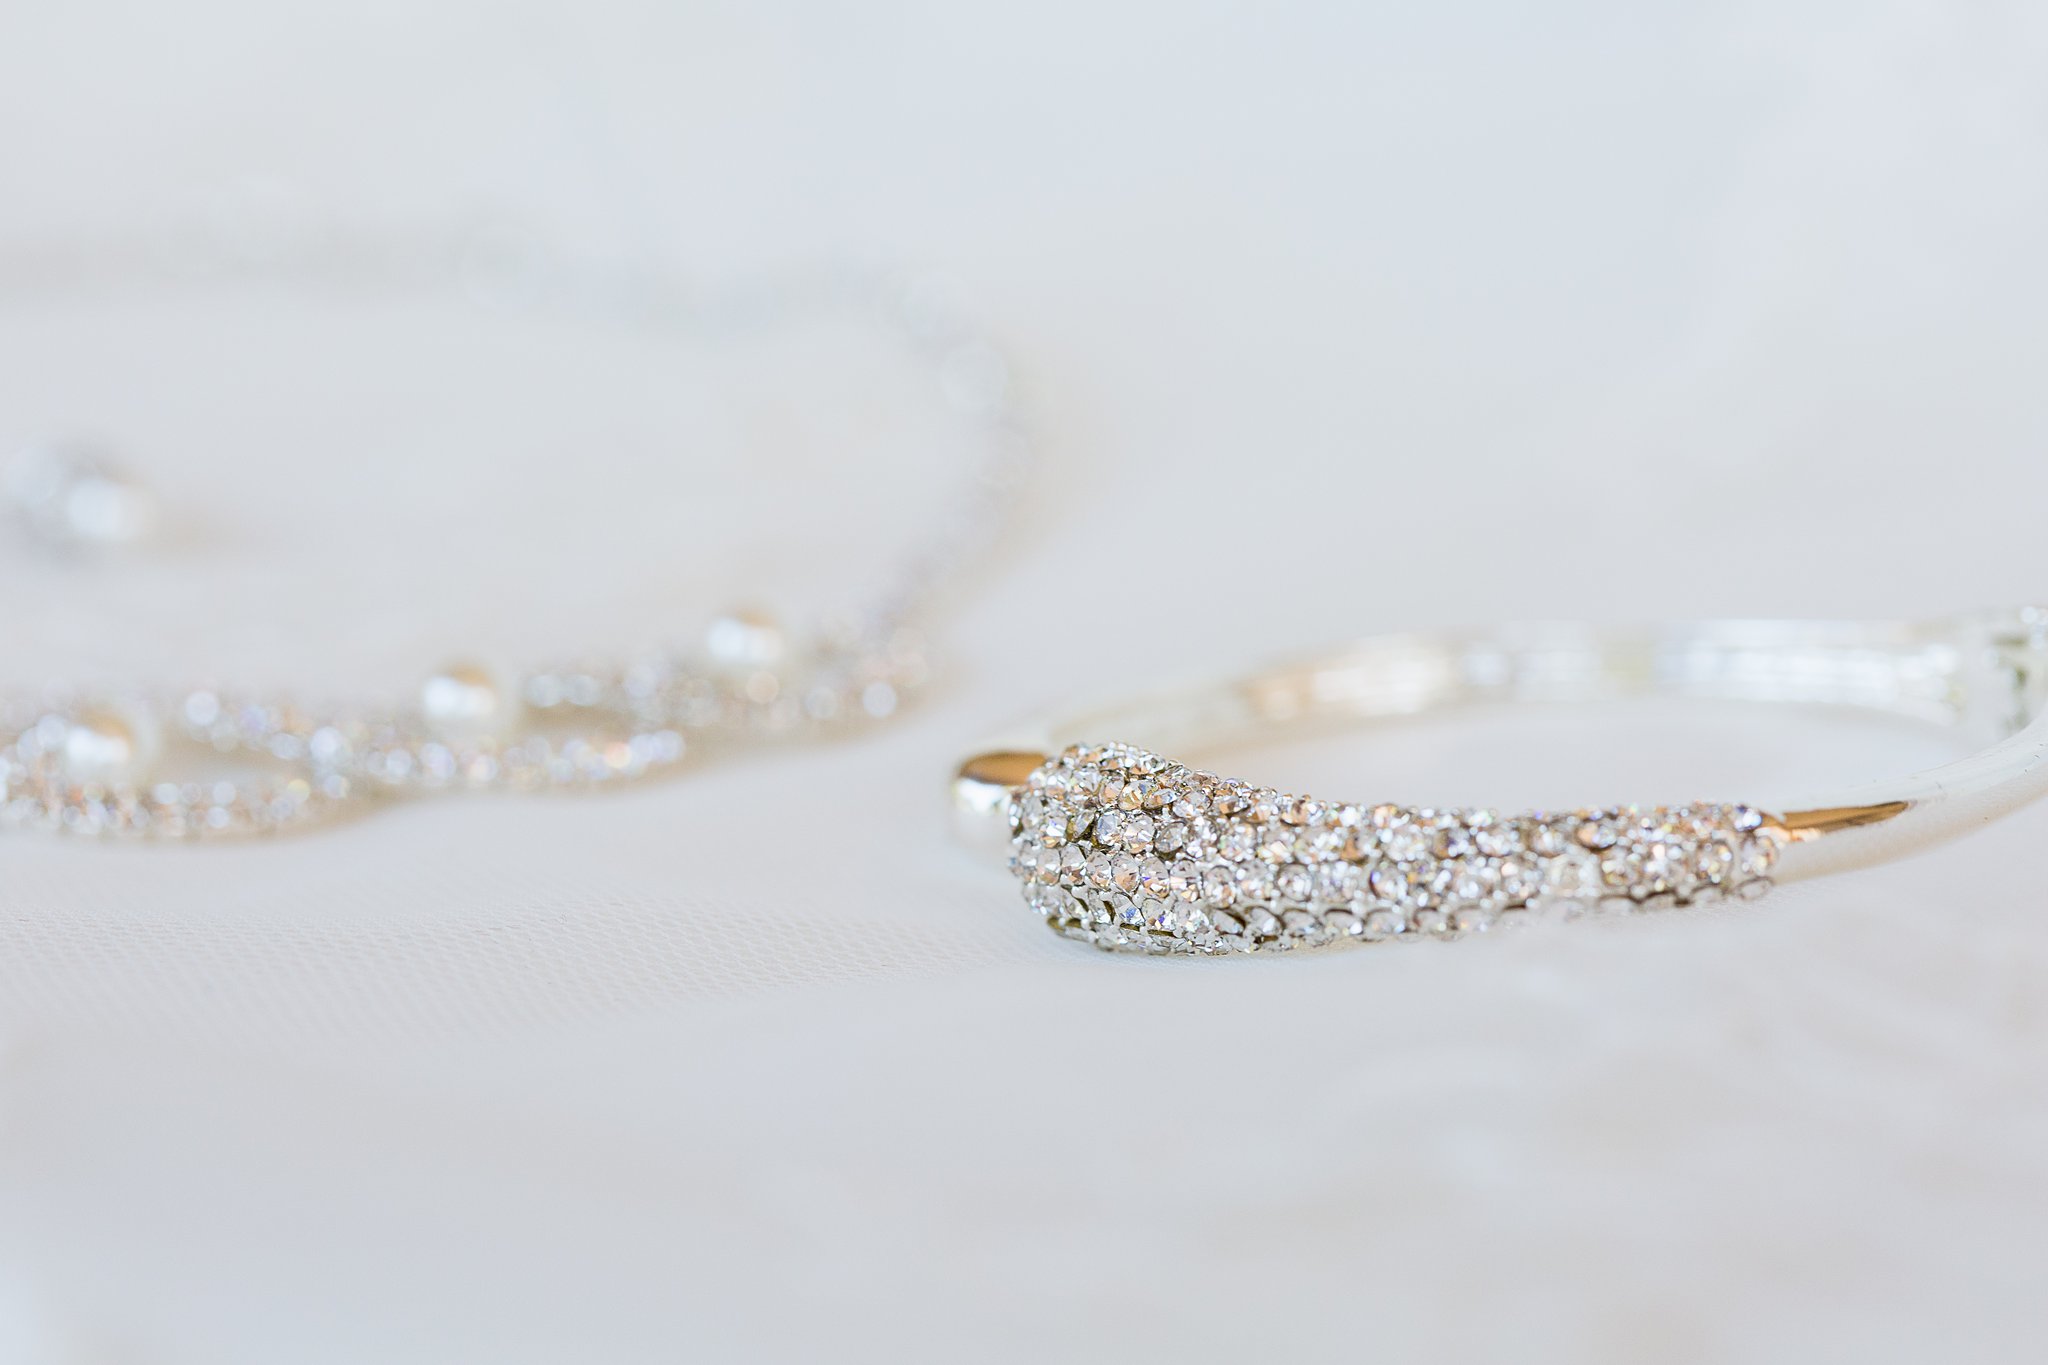 Brides's wedding day details of a bracelet and necklace by PMA Photography.